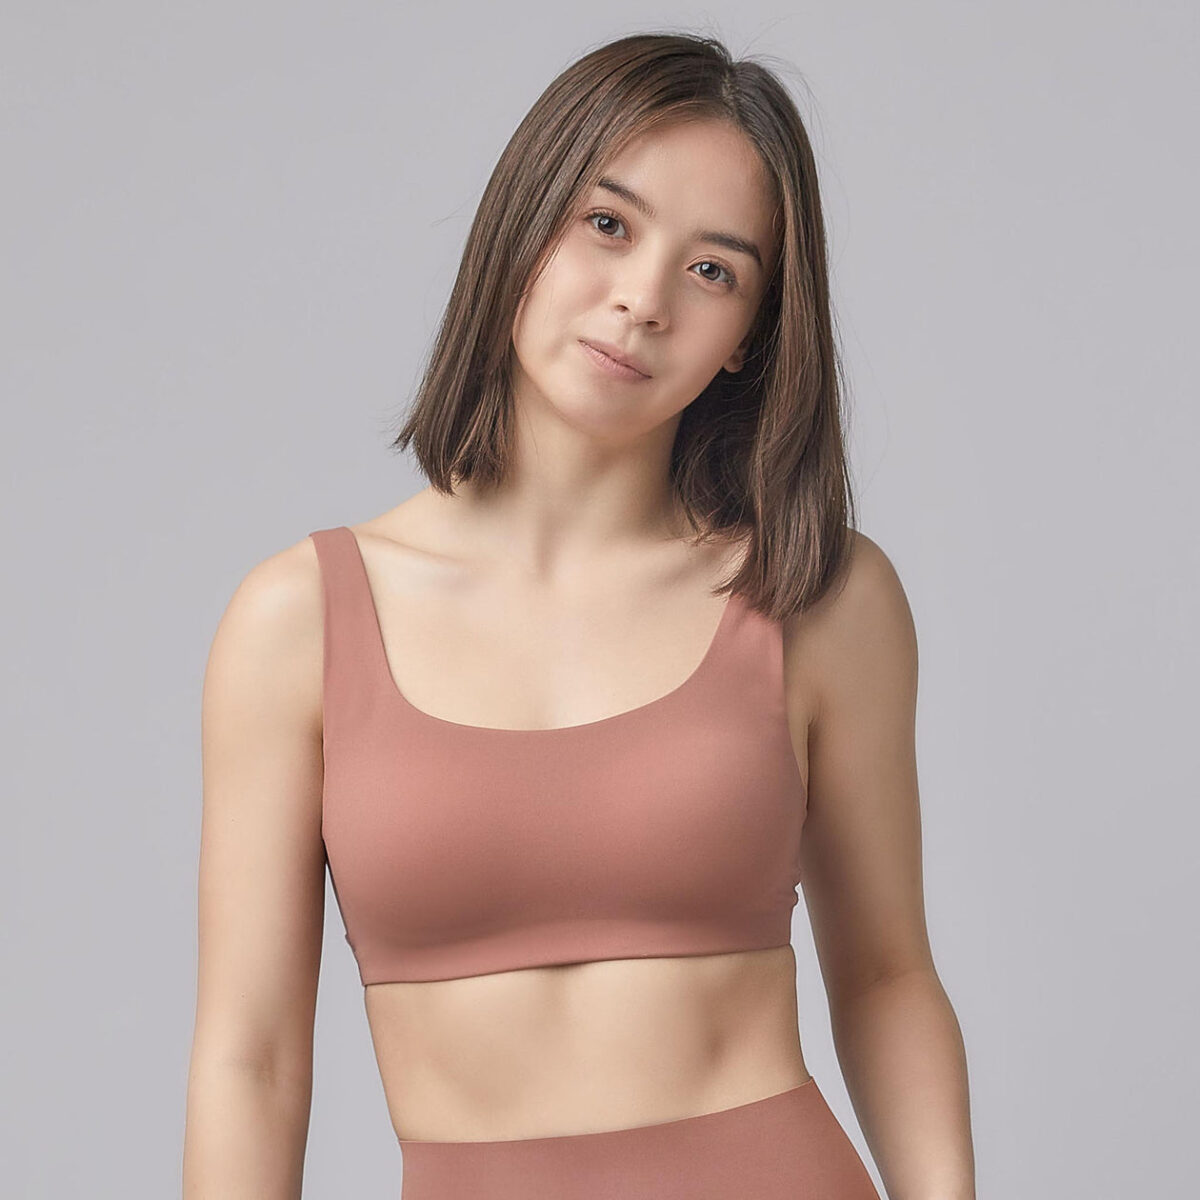 20 Of The Best Undergarments For Women &Amp; Men To To Keep You Cool This Season